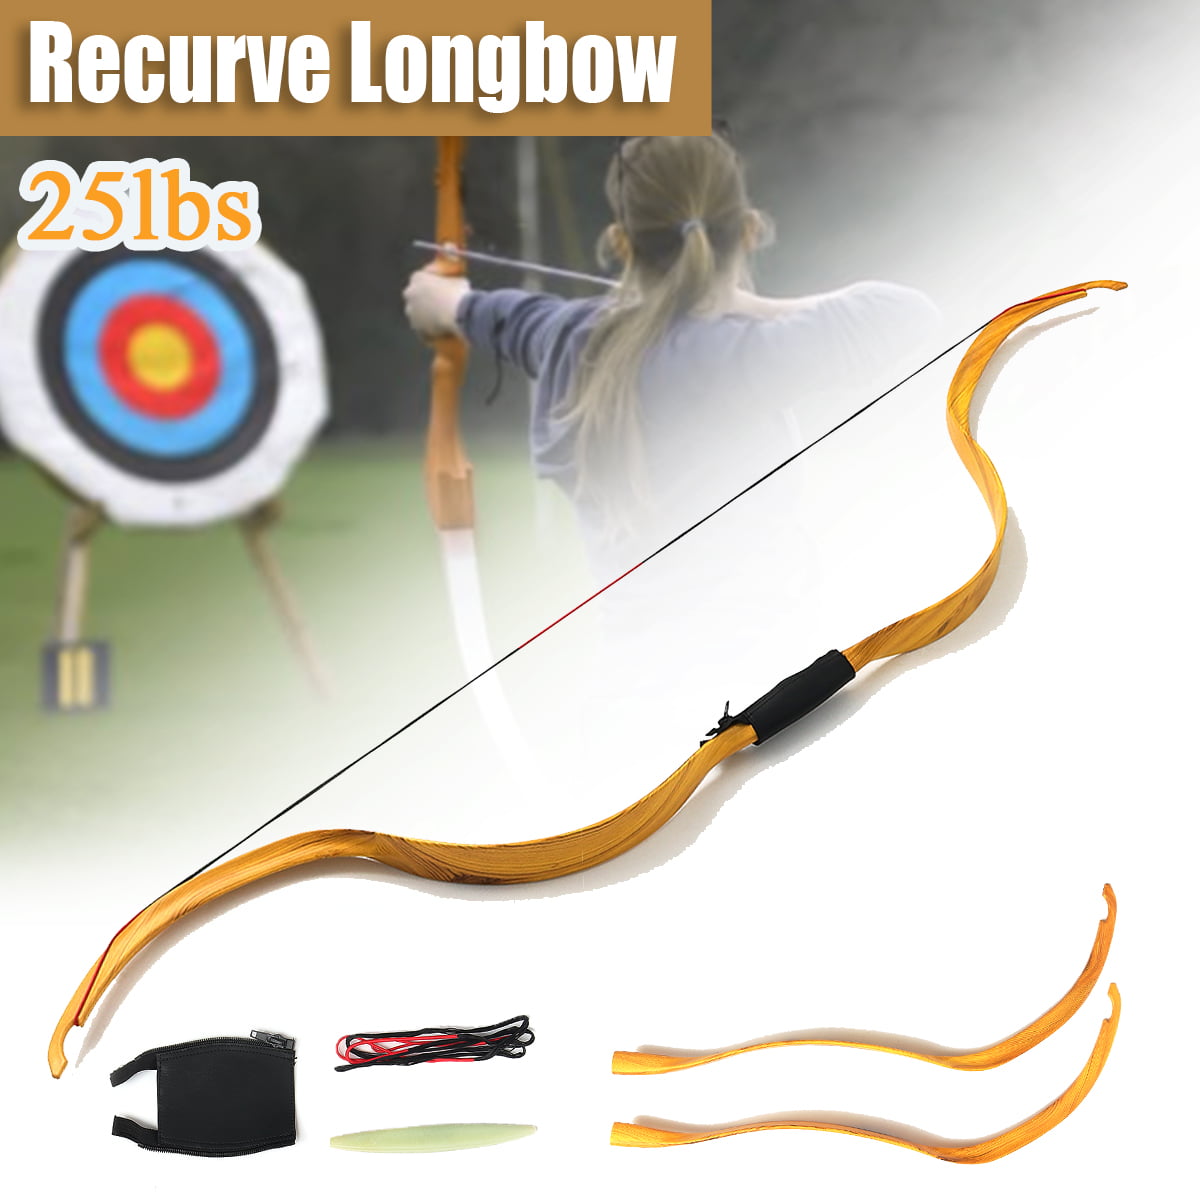 30-55lb Archery Recurve Bow Traditional Longbow Handmade Horsebow Target Hunting